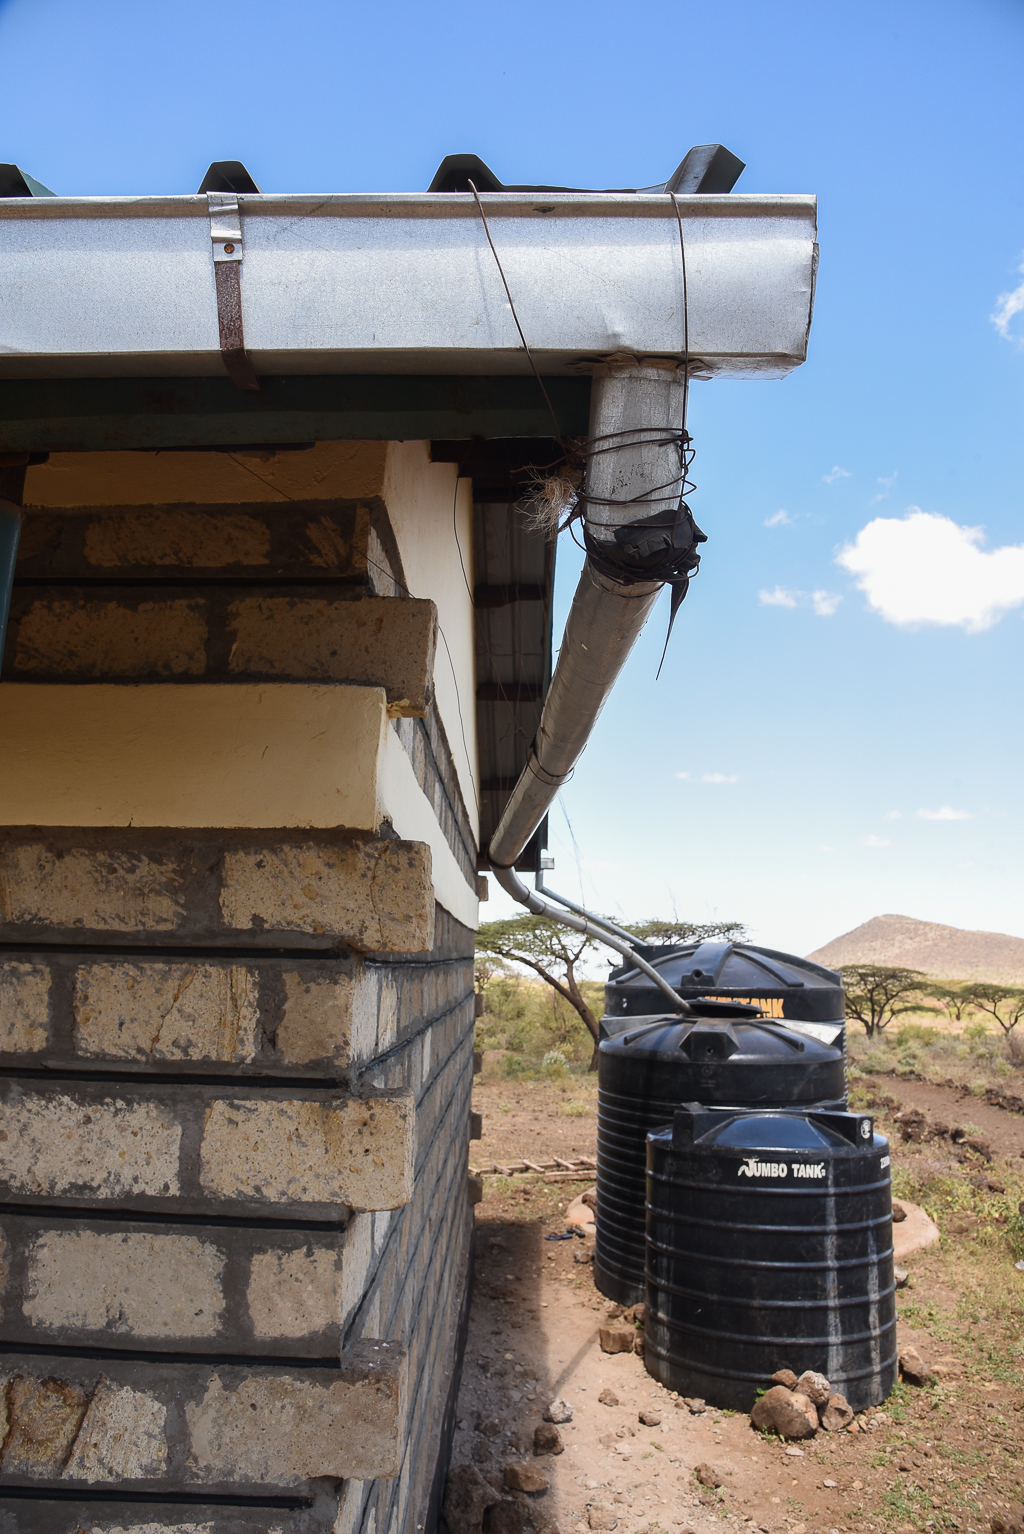 Tanks for roof water catchment